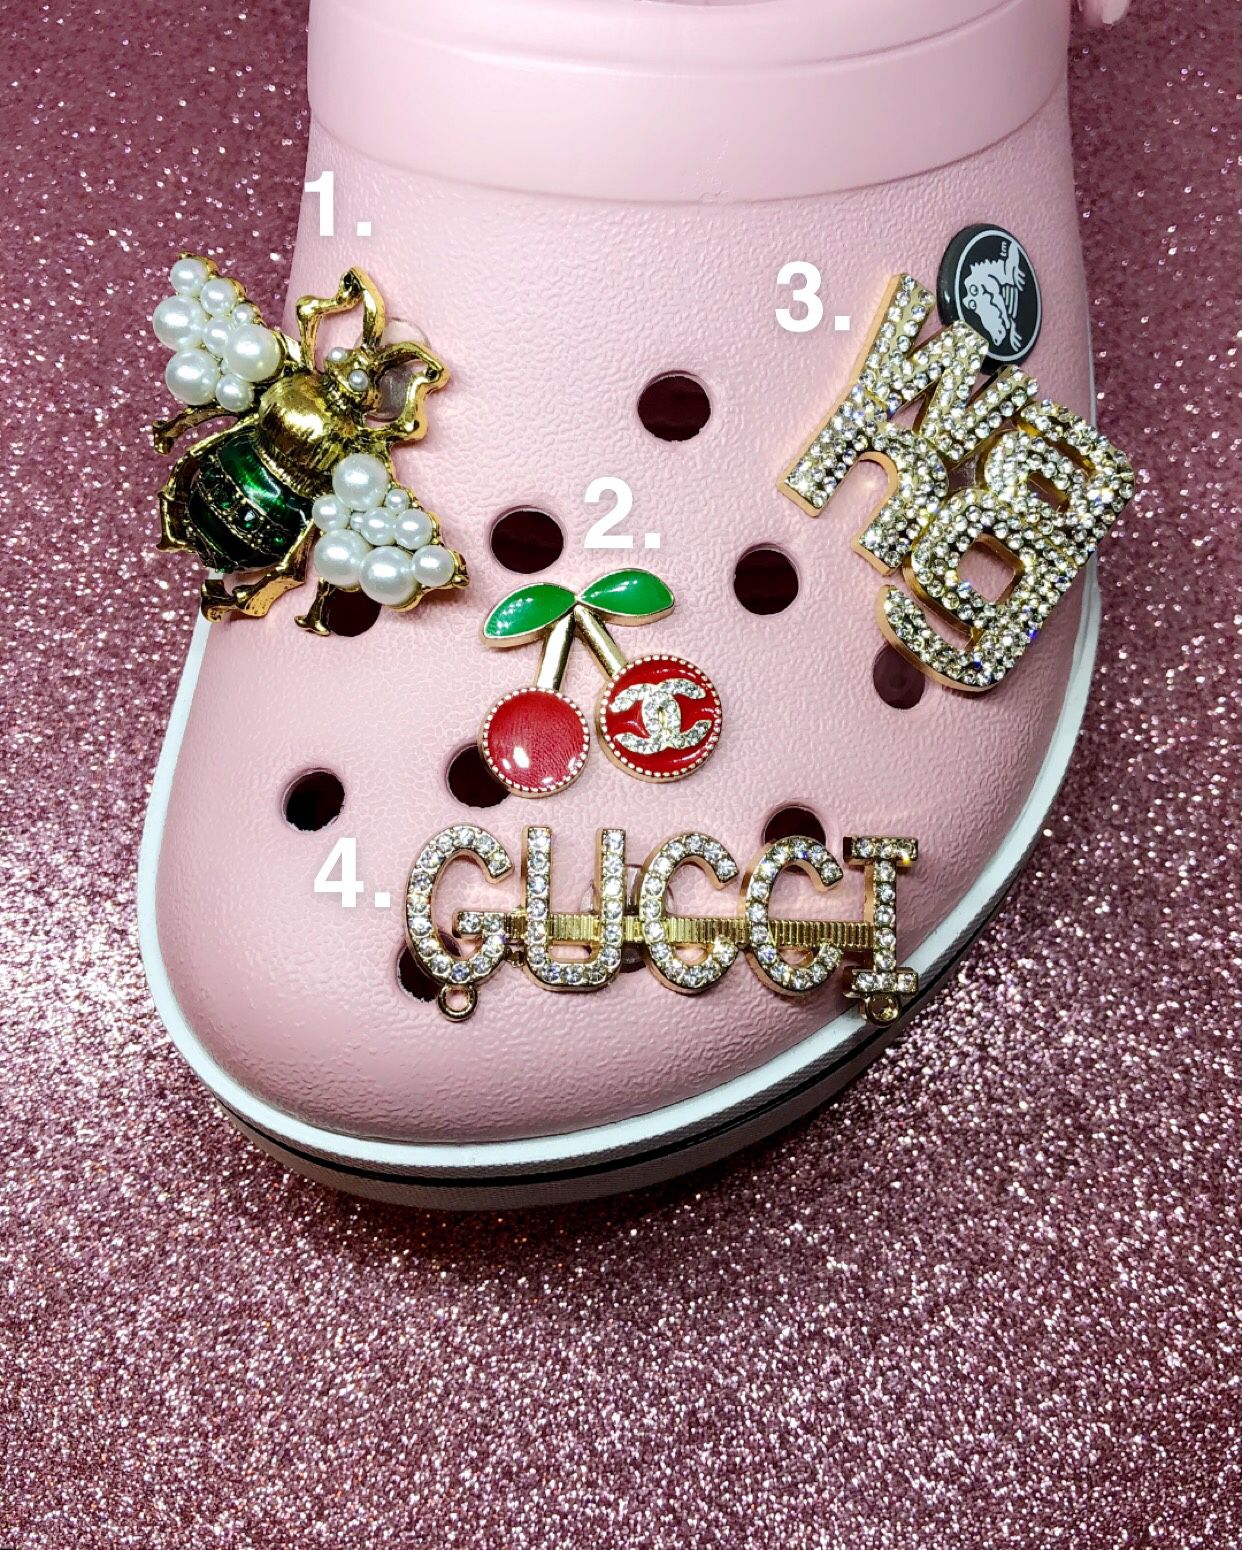 Set of 4 Designer Croc Charms for Sale in Los Angeles, CA - OfferUp